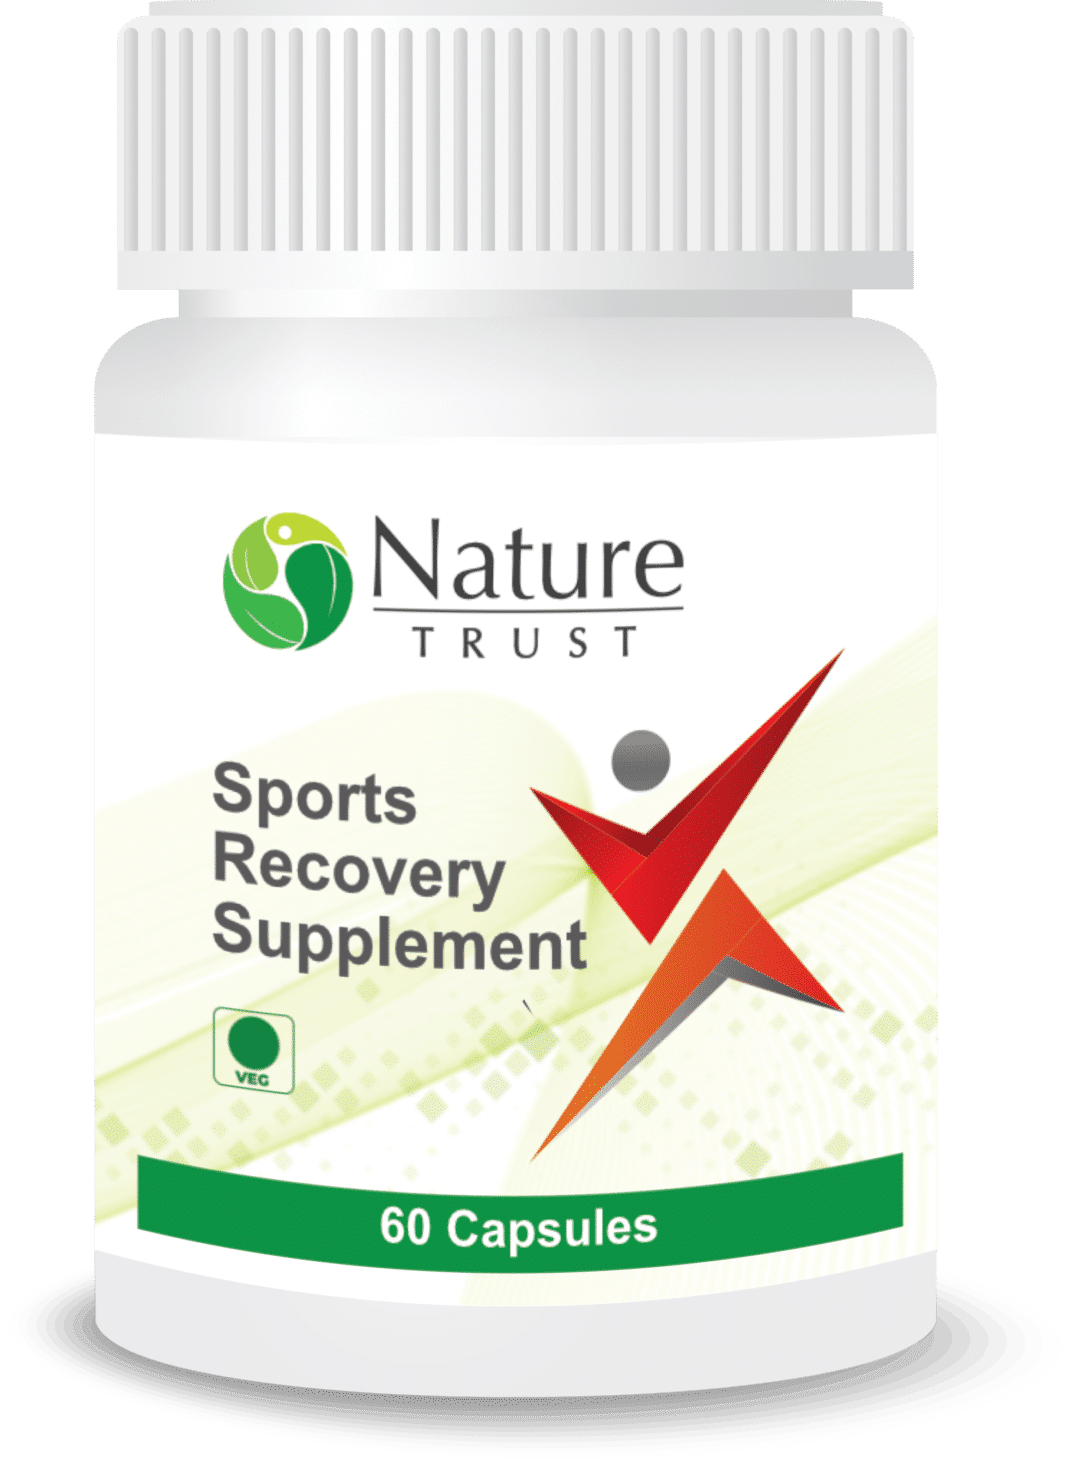 Sports recovery supplement